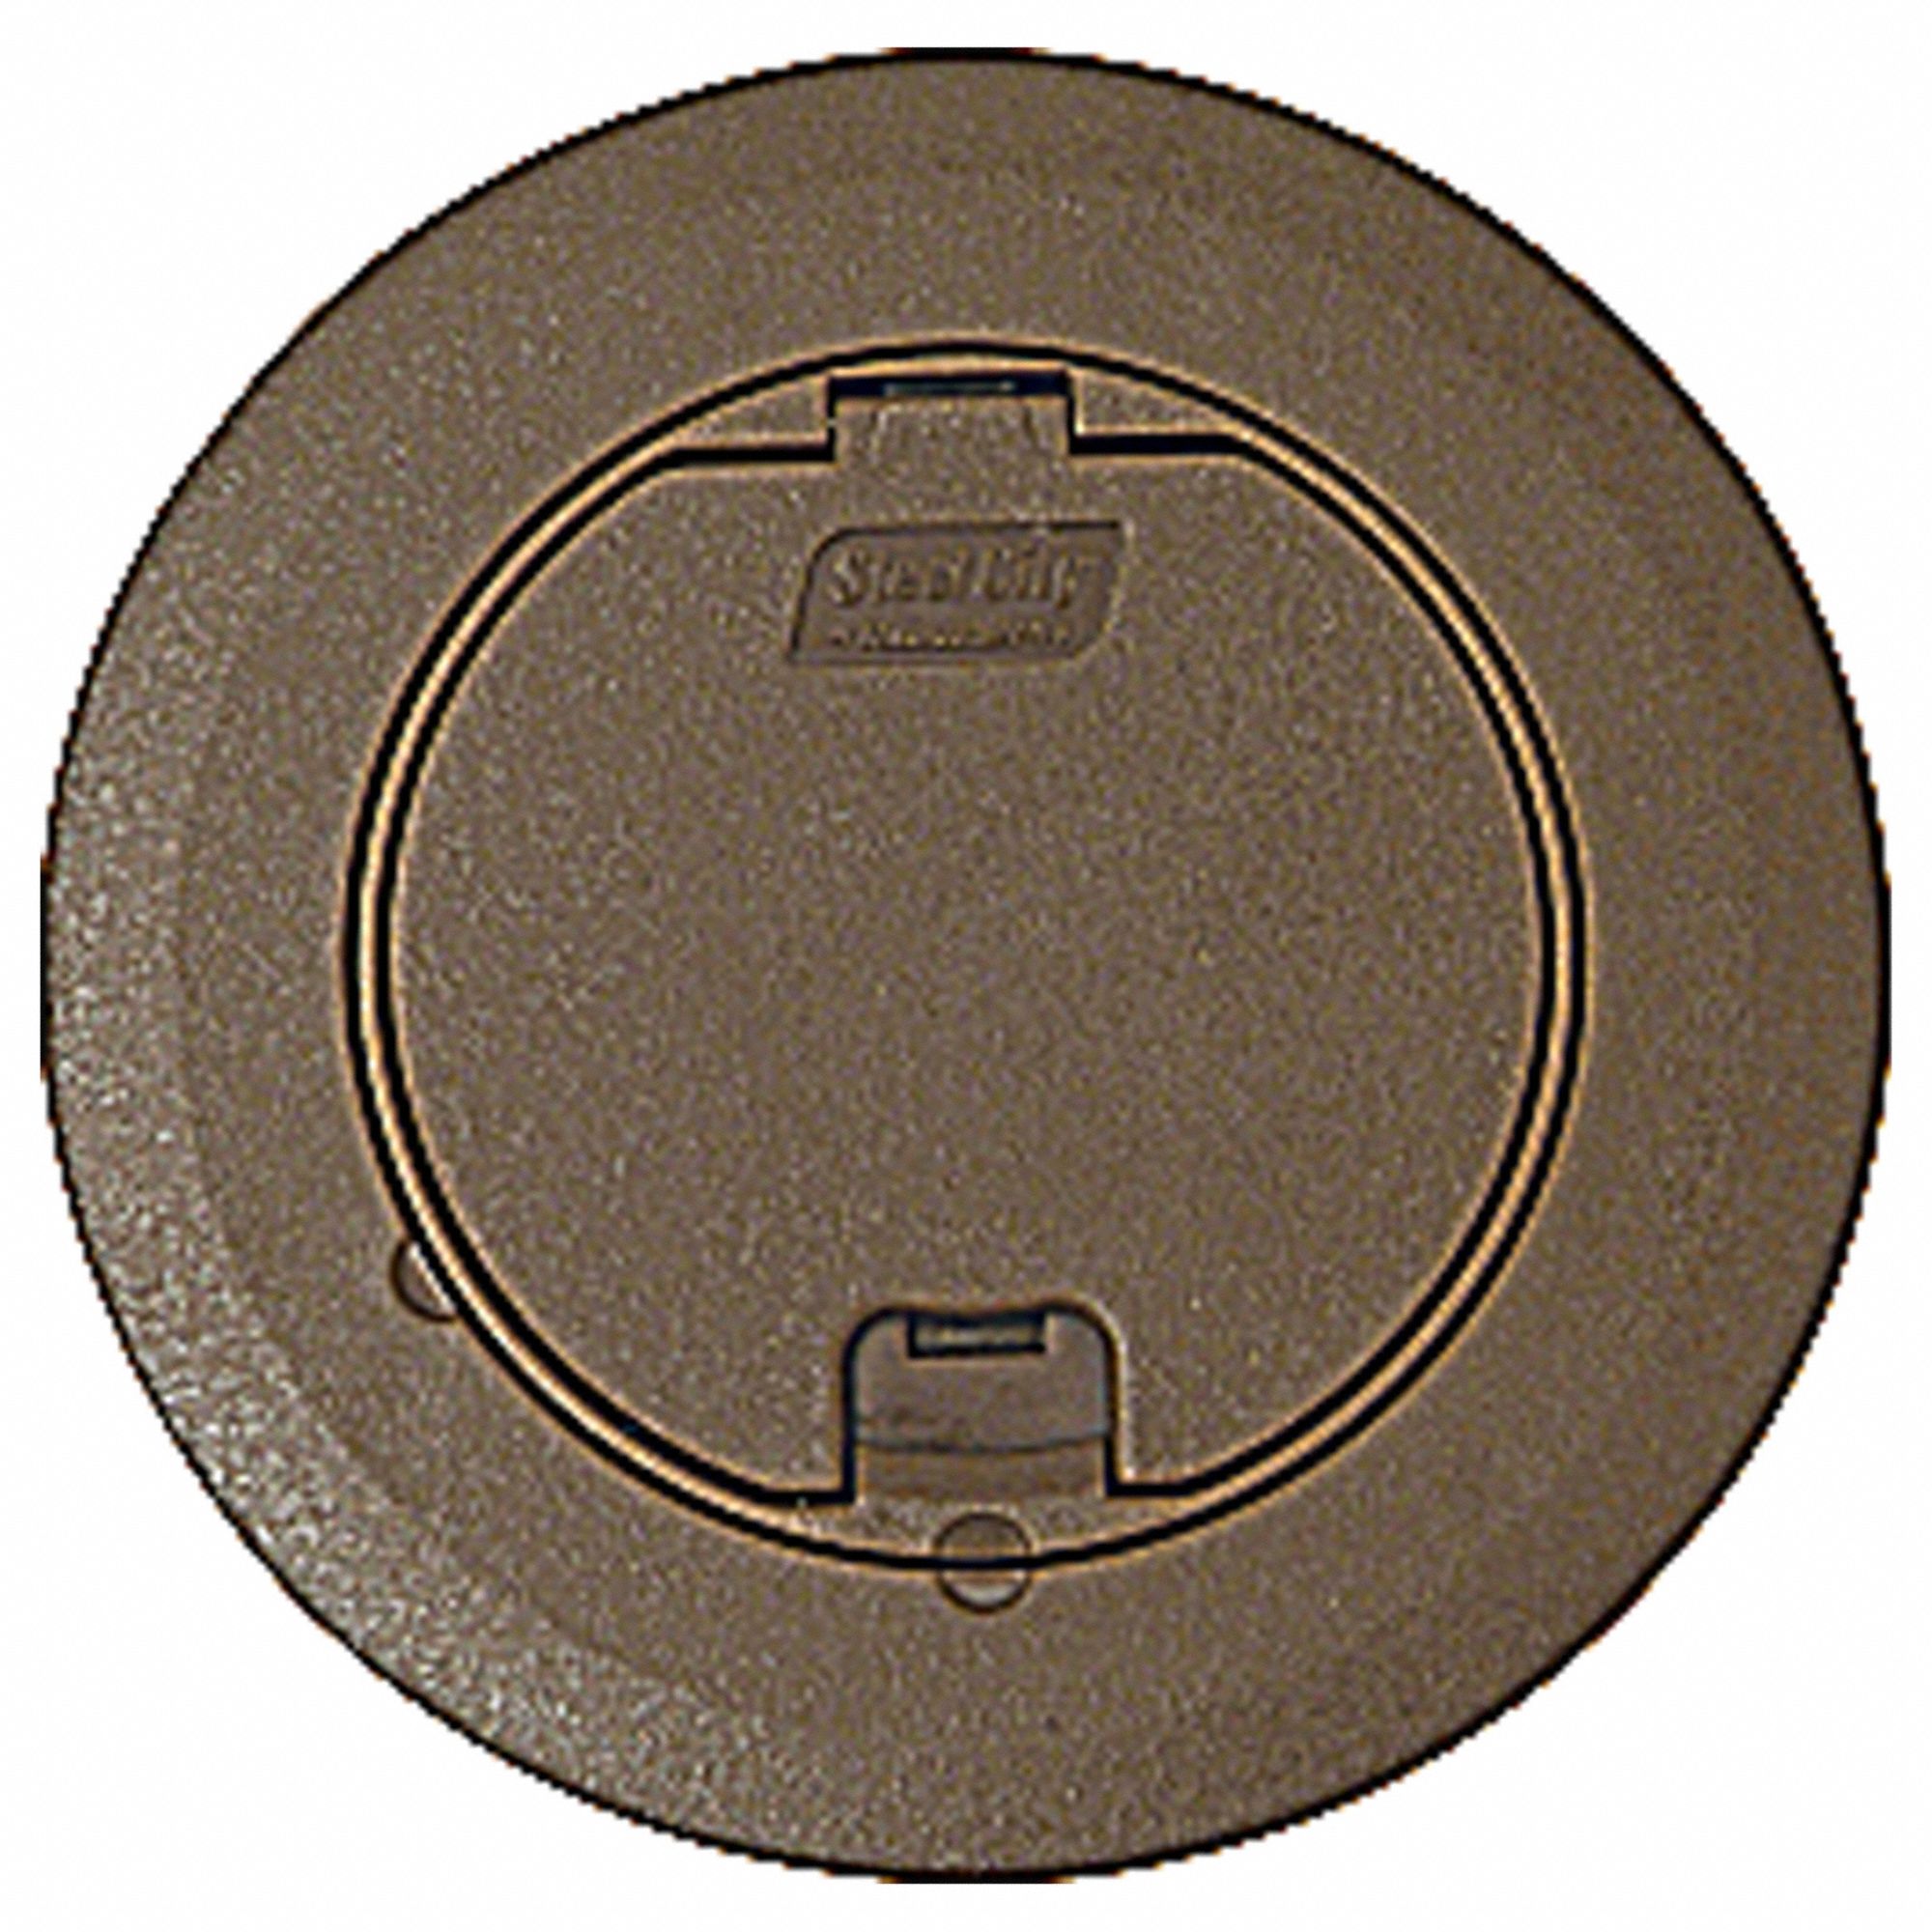 Floor Box Cover and Carpet Flange: Round, 6 3/4 in Lg, 4 3/4 in Wd